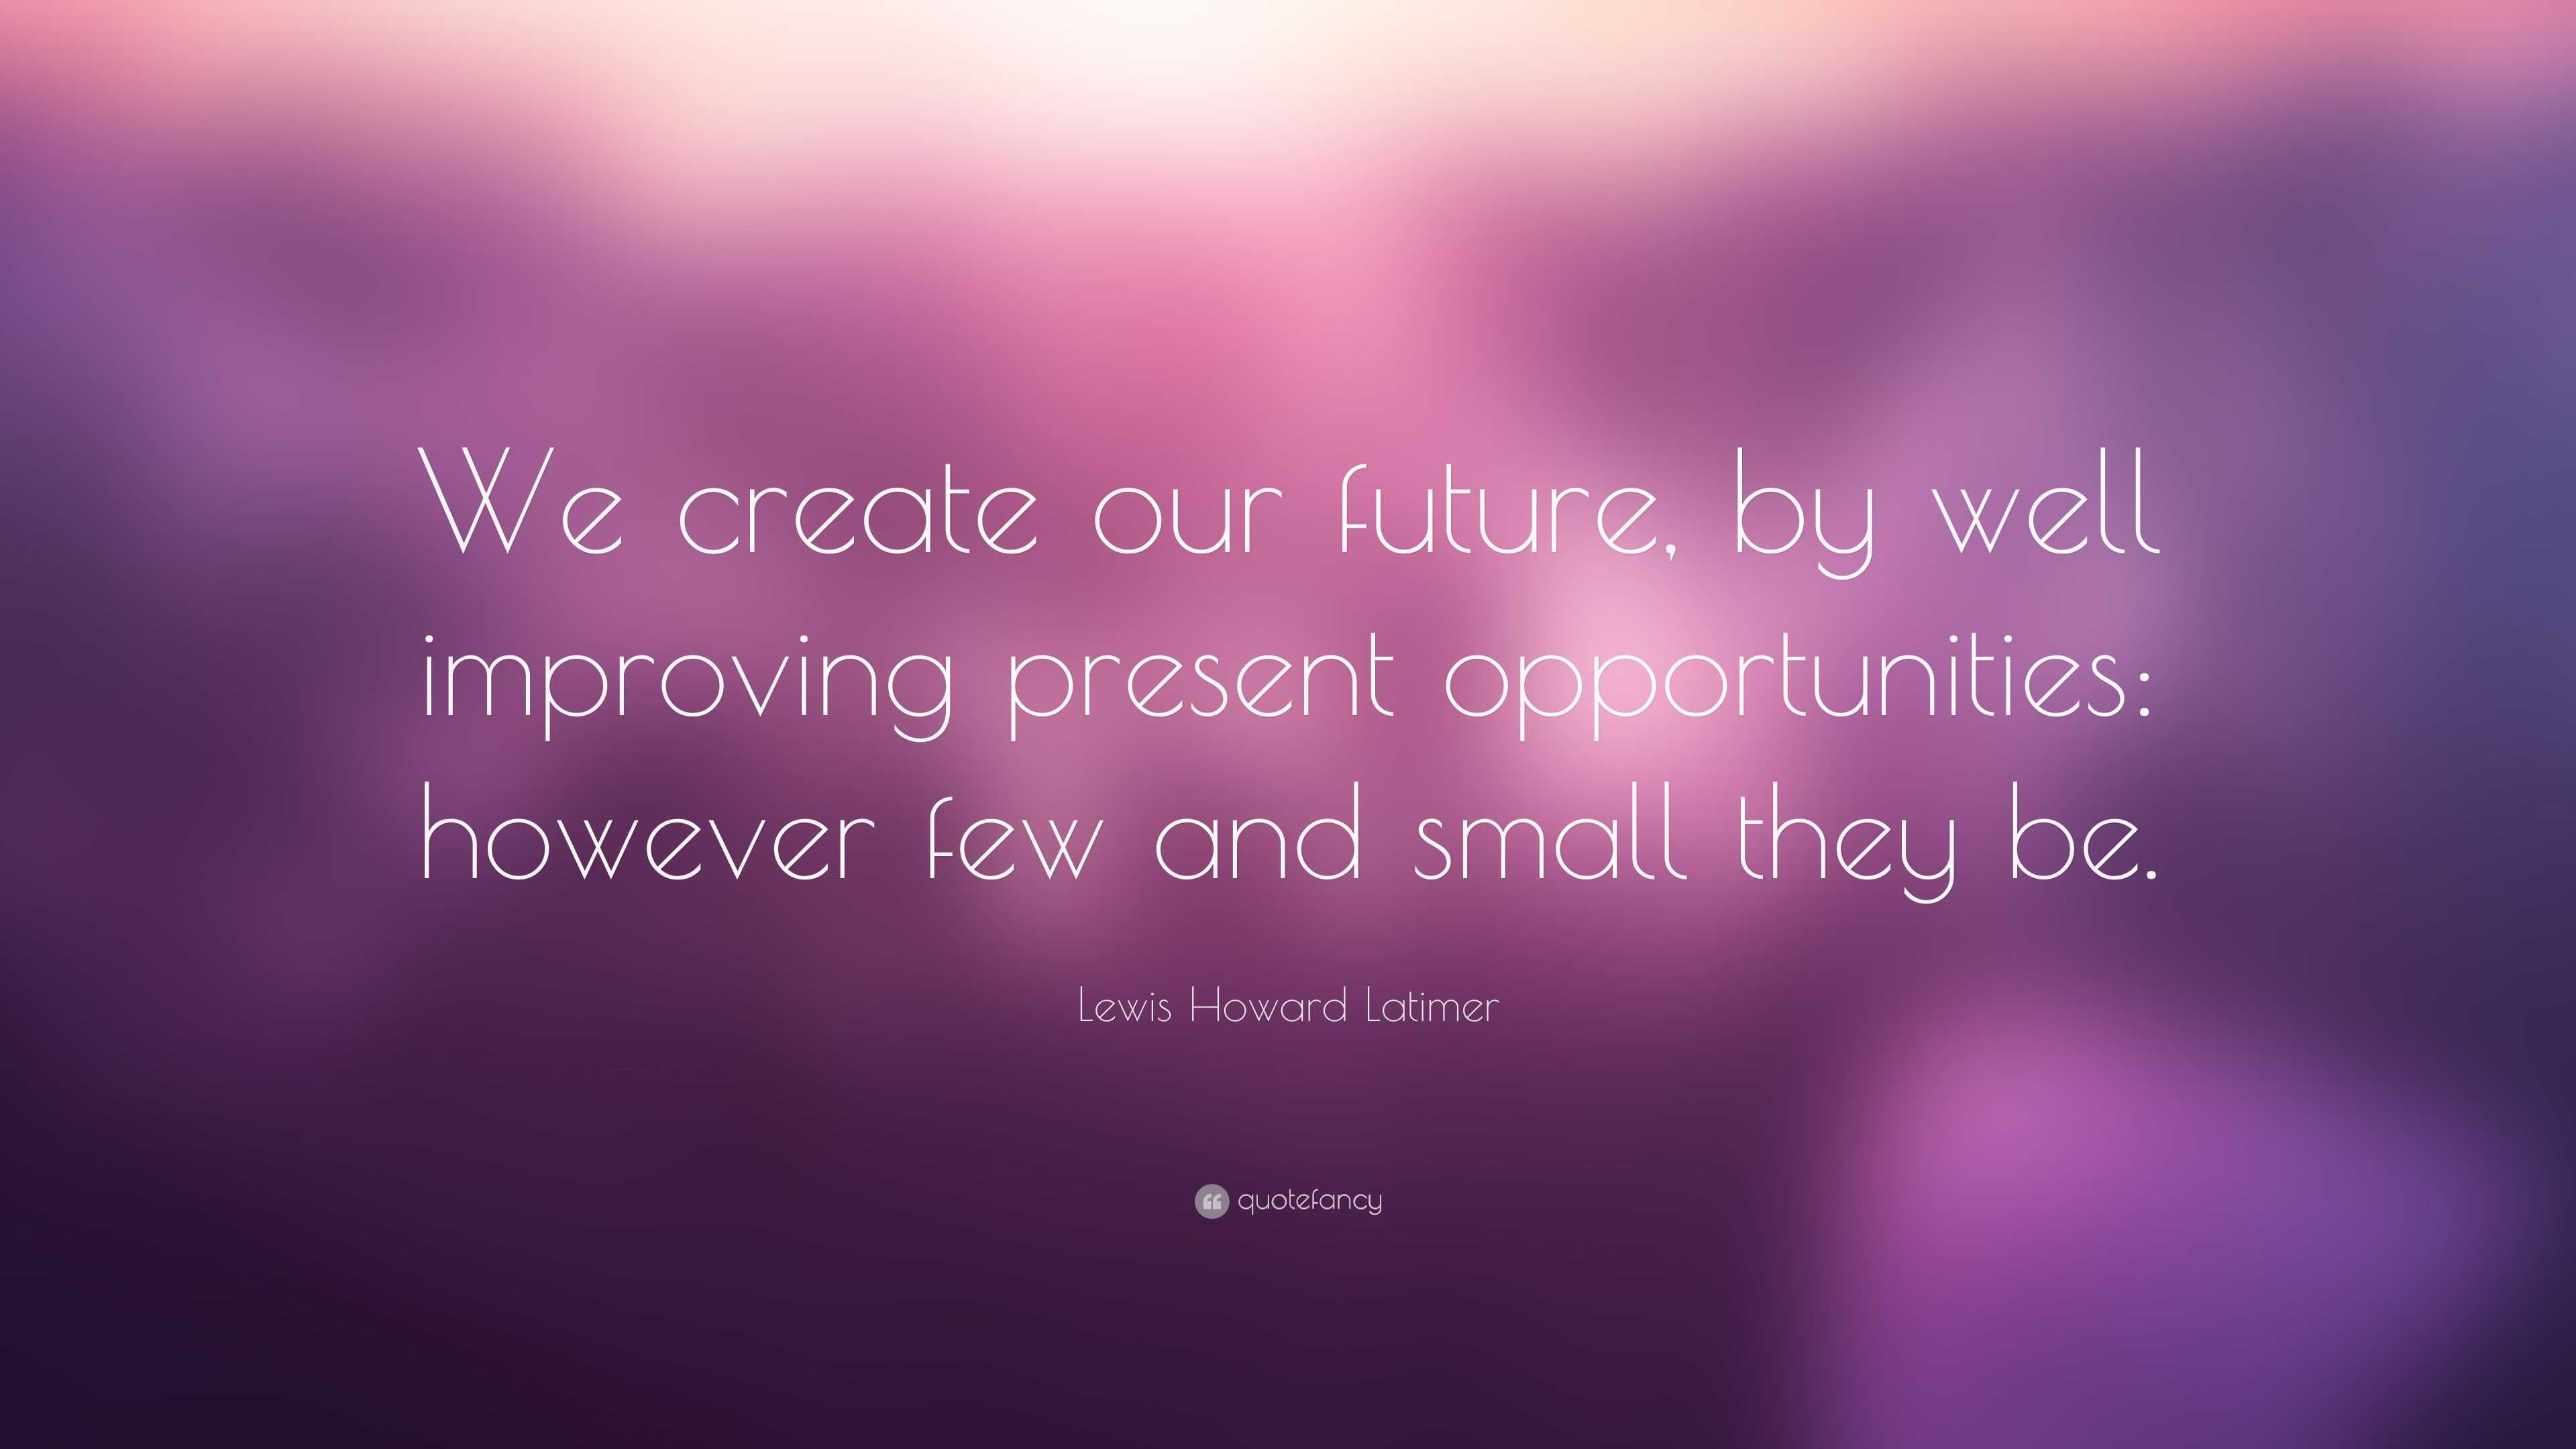 Lewis Howard Latimer Quote: “We create our future, by well improving ...